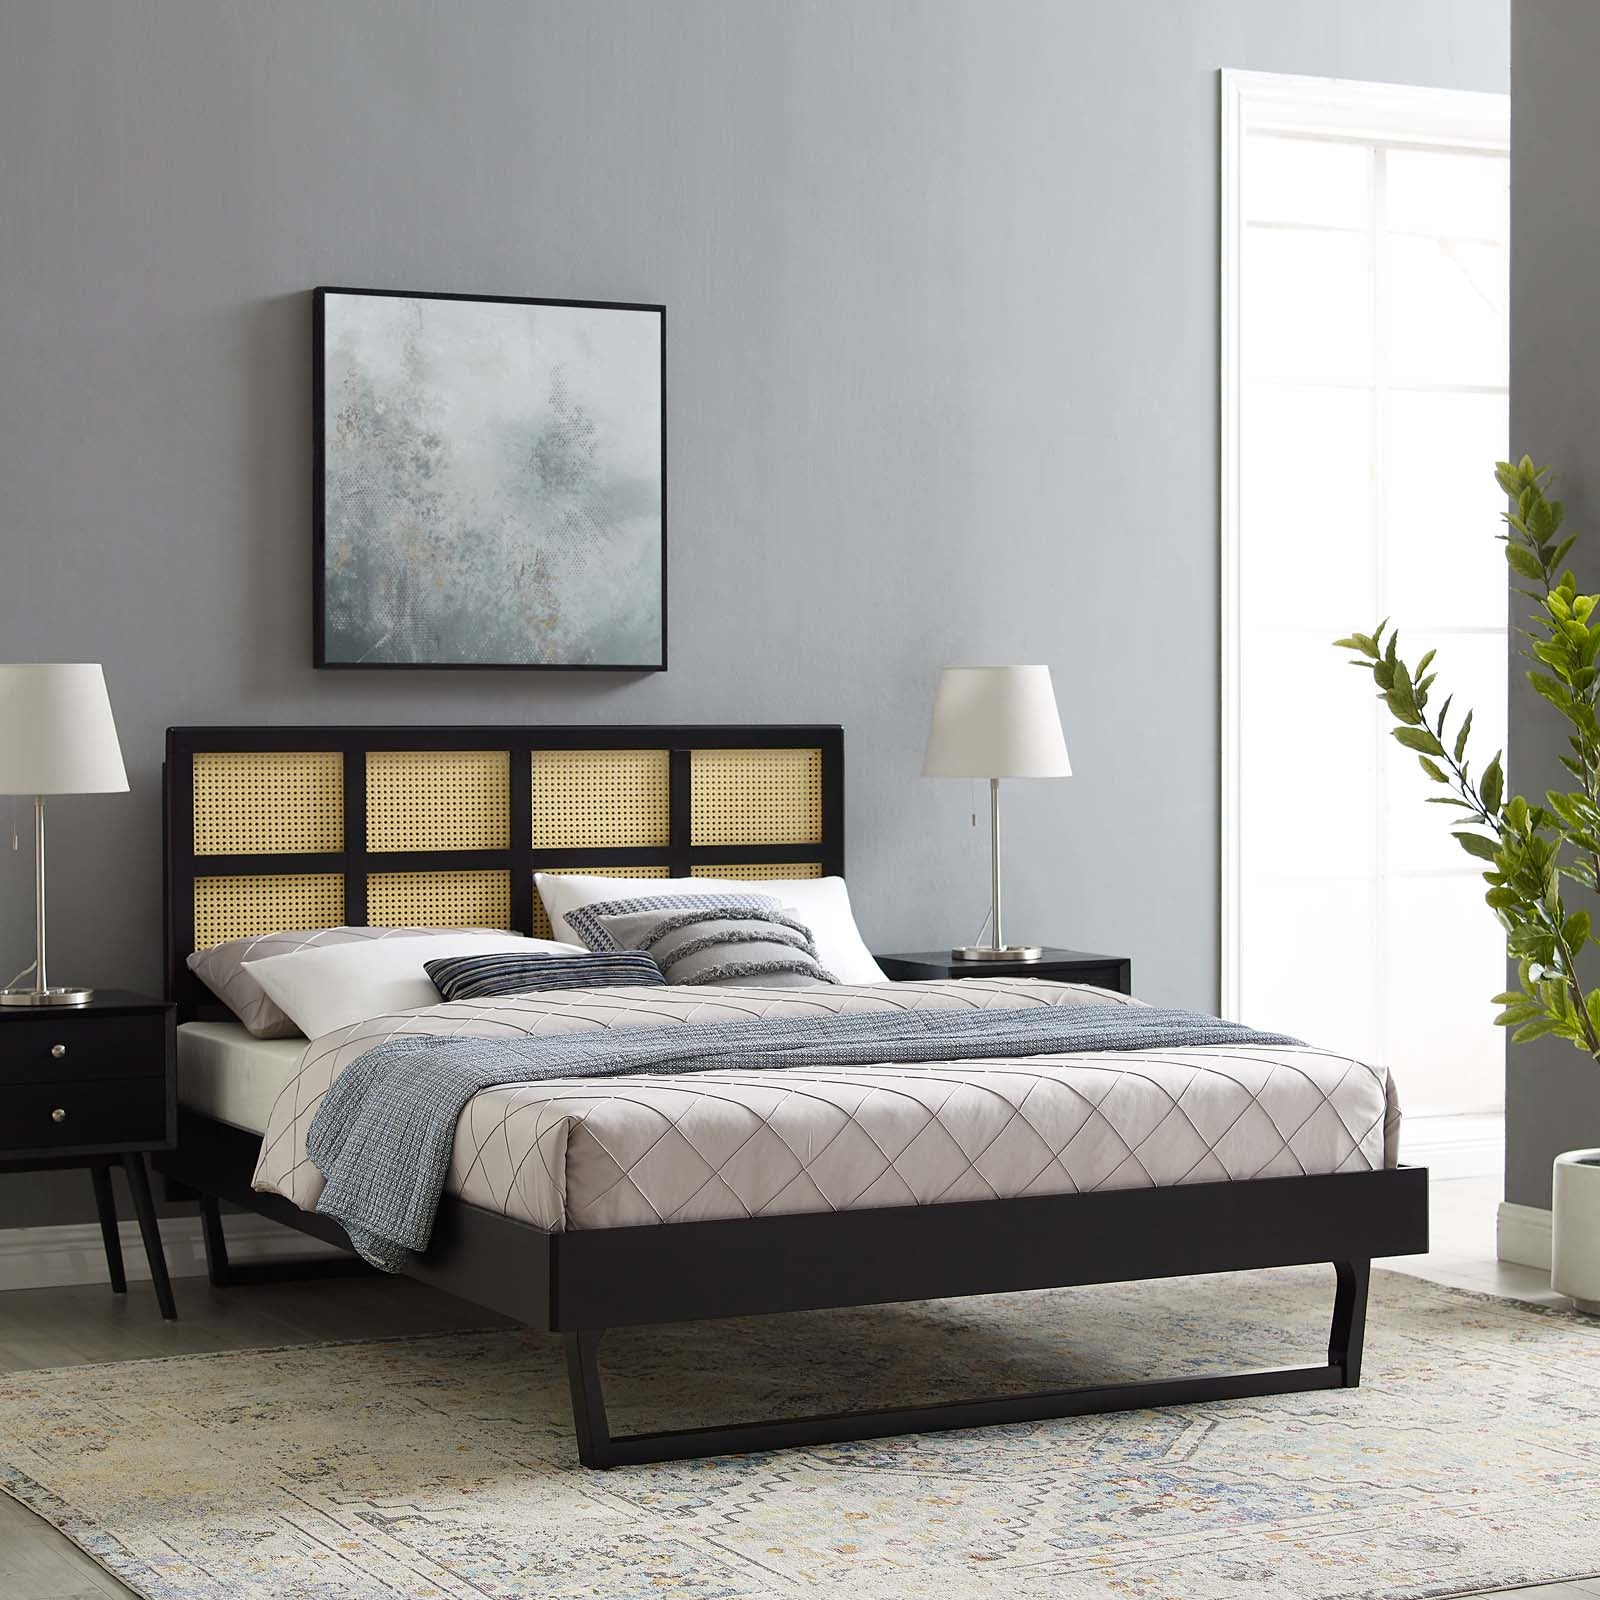 Sidney Cane and Wood King Platform Bed With Angular Legs - East Shore Modern Home Furnishings